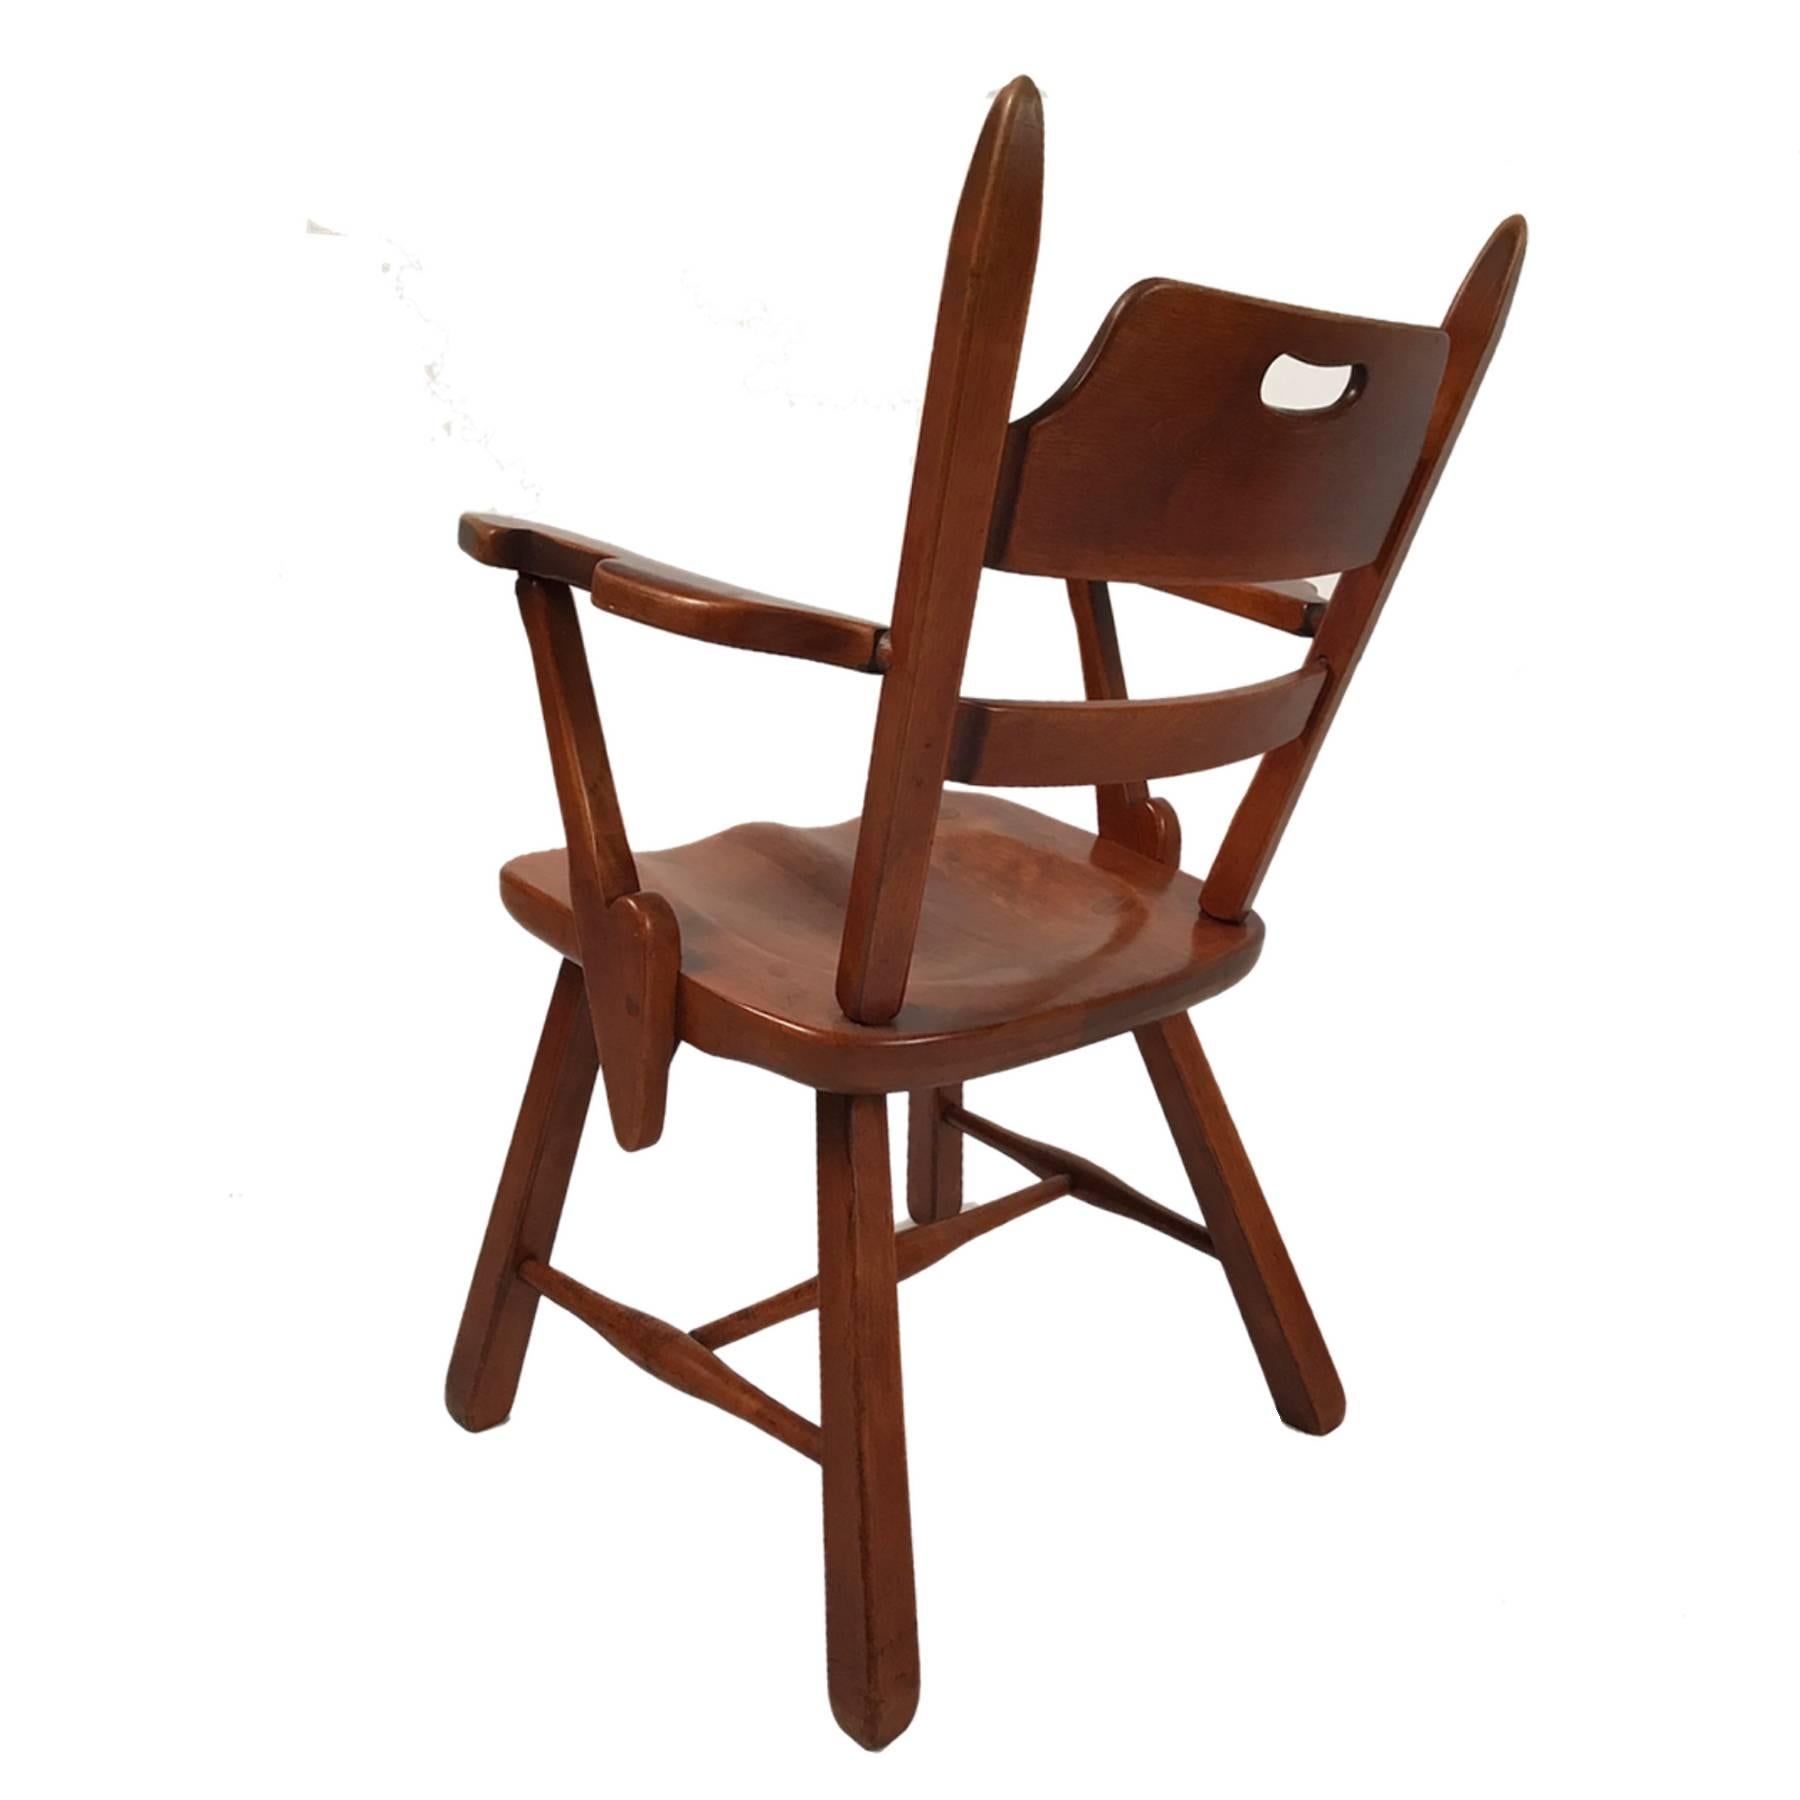 Modern craftsman style chairs produced by Cushman Vermont. Made of Vermont hard rock maple. Designed by Herman DeVries. Metal ID tags attached.